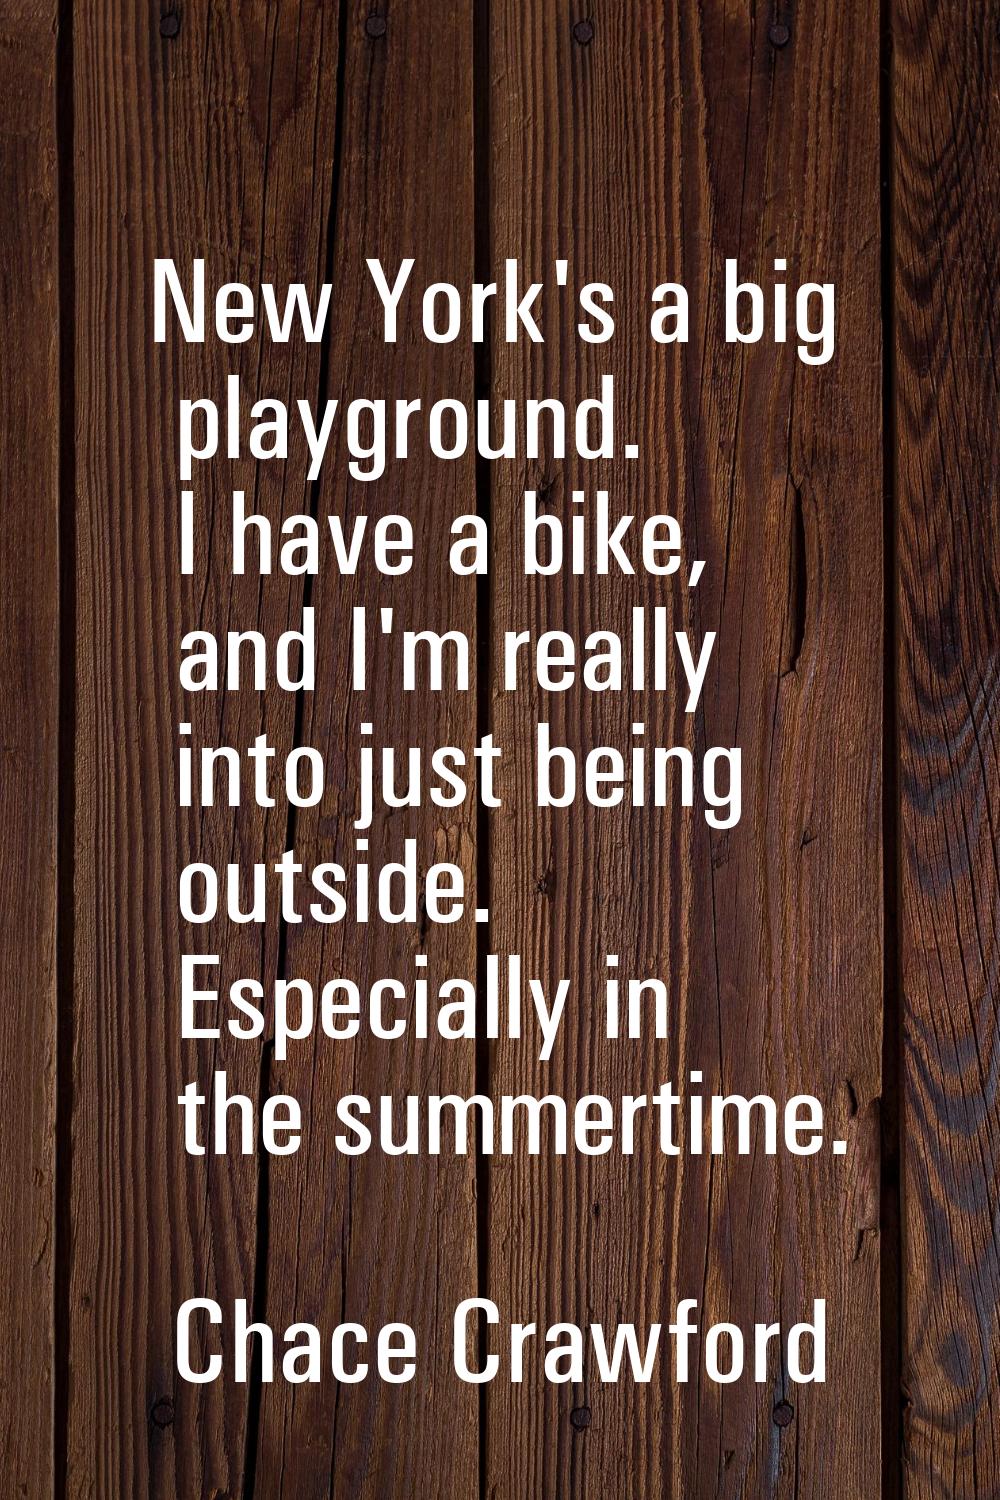 New York's a big playground. I have a bike, and I'm really into just being outside. Especially in t